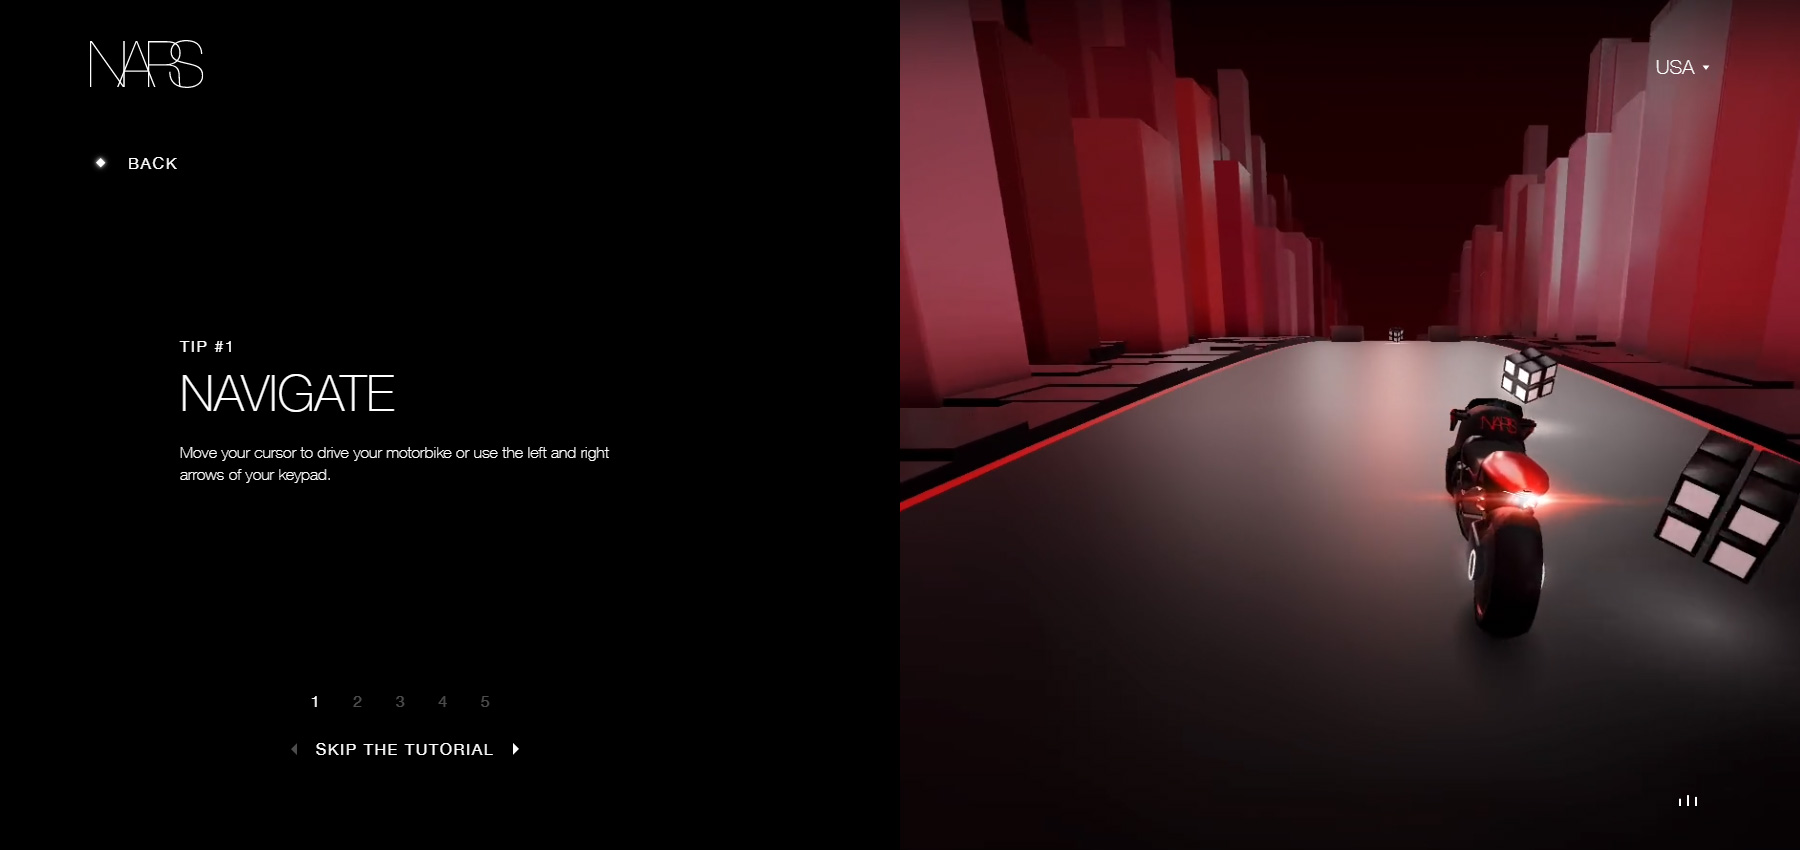 NARS - Play Your Power - Website of the Day